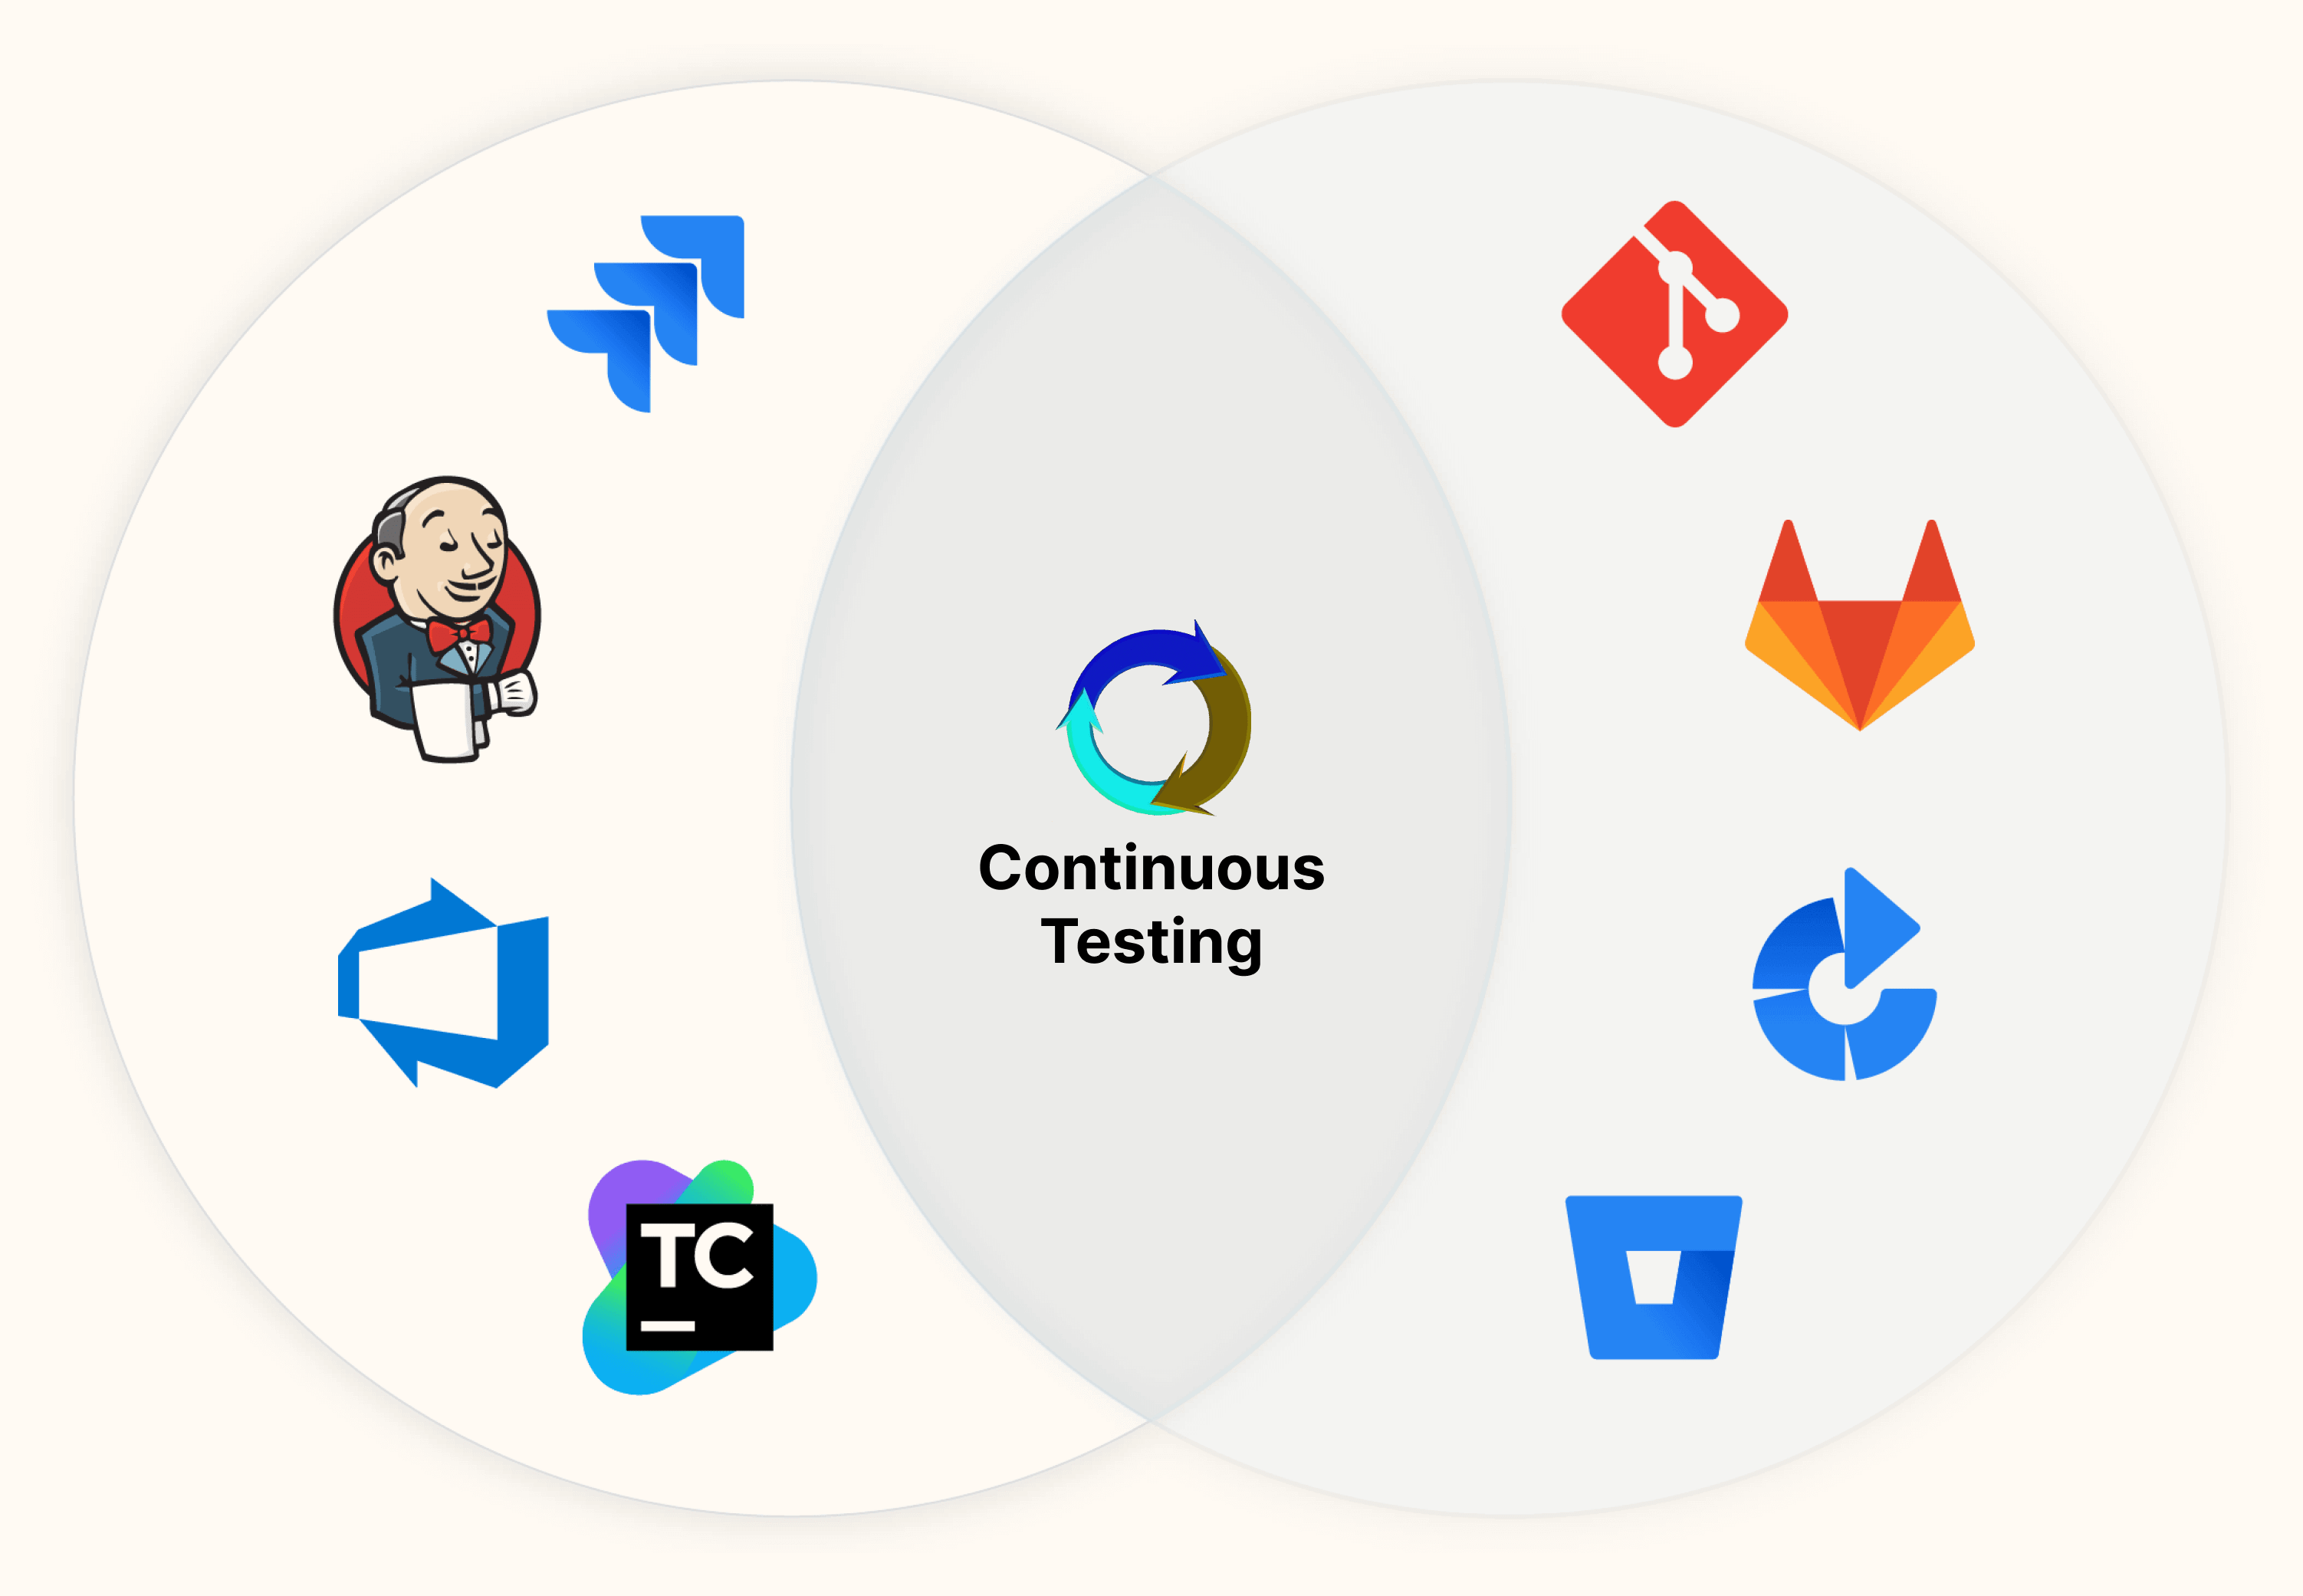 Continuous Testing cicd